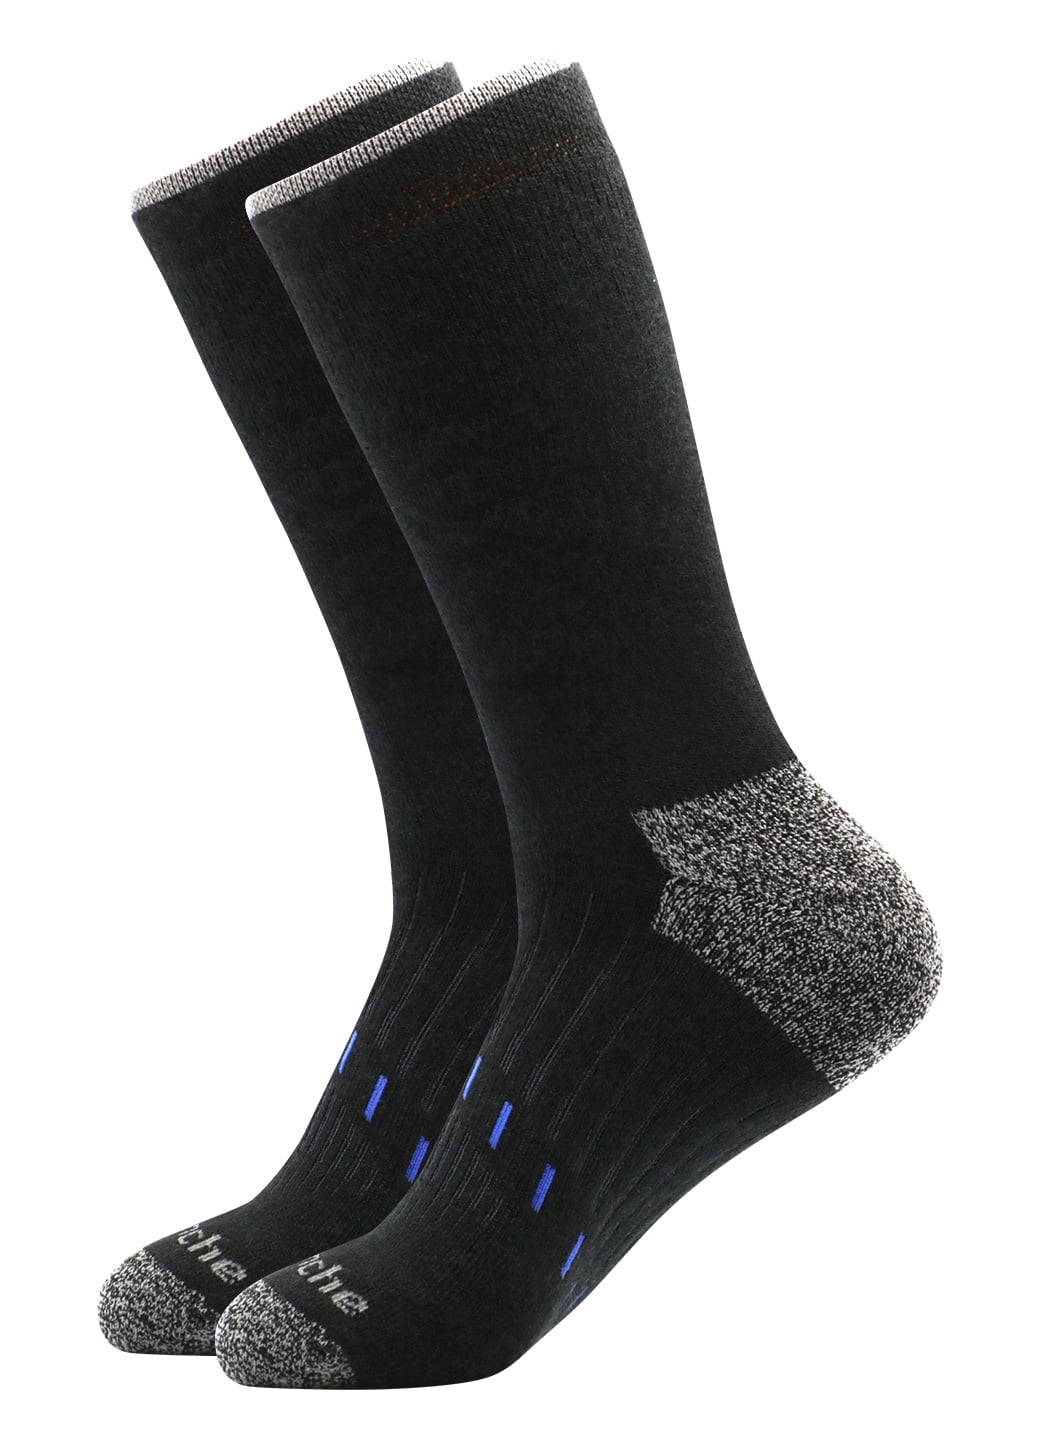 Avalanche Men's Quick Drying Merino Wool Blend Quarter Socks With Arch Support 2-Pack 